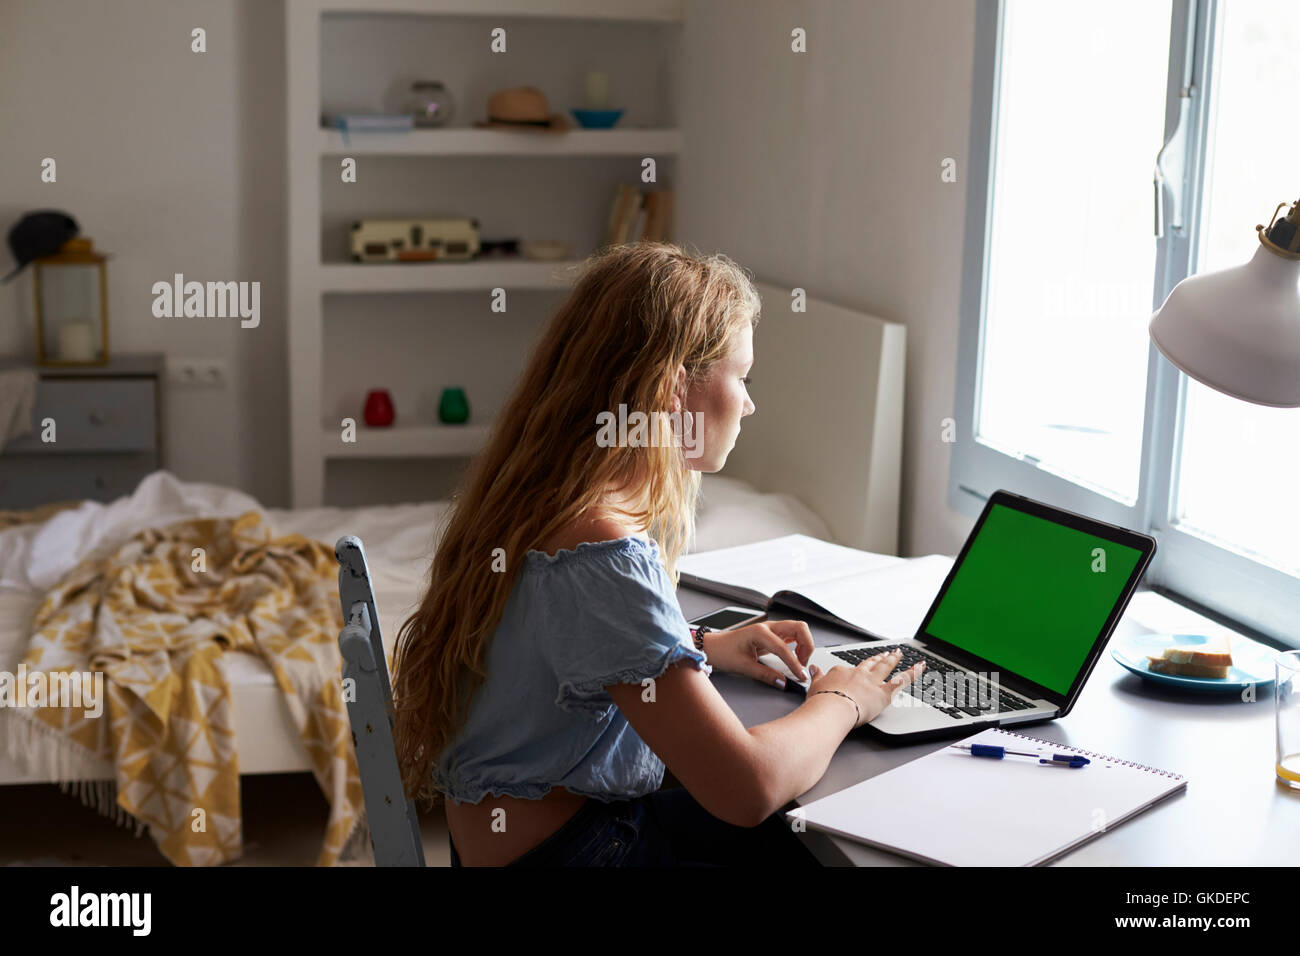 Teenage girl using laptop computer at a desk in her bedroom Stock Photo